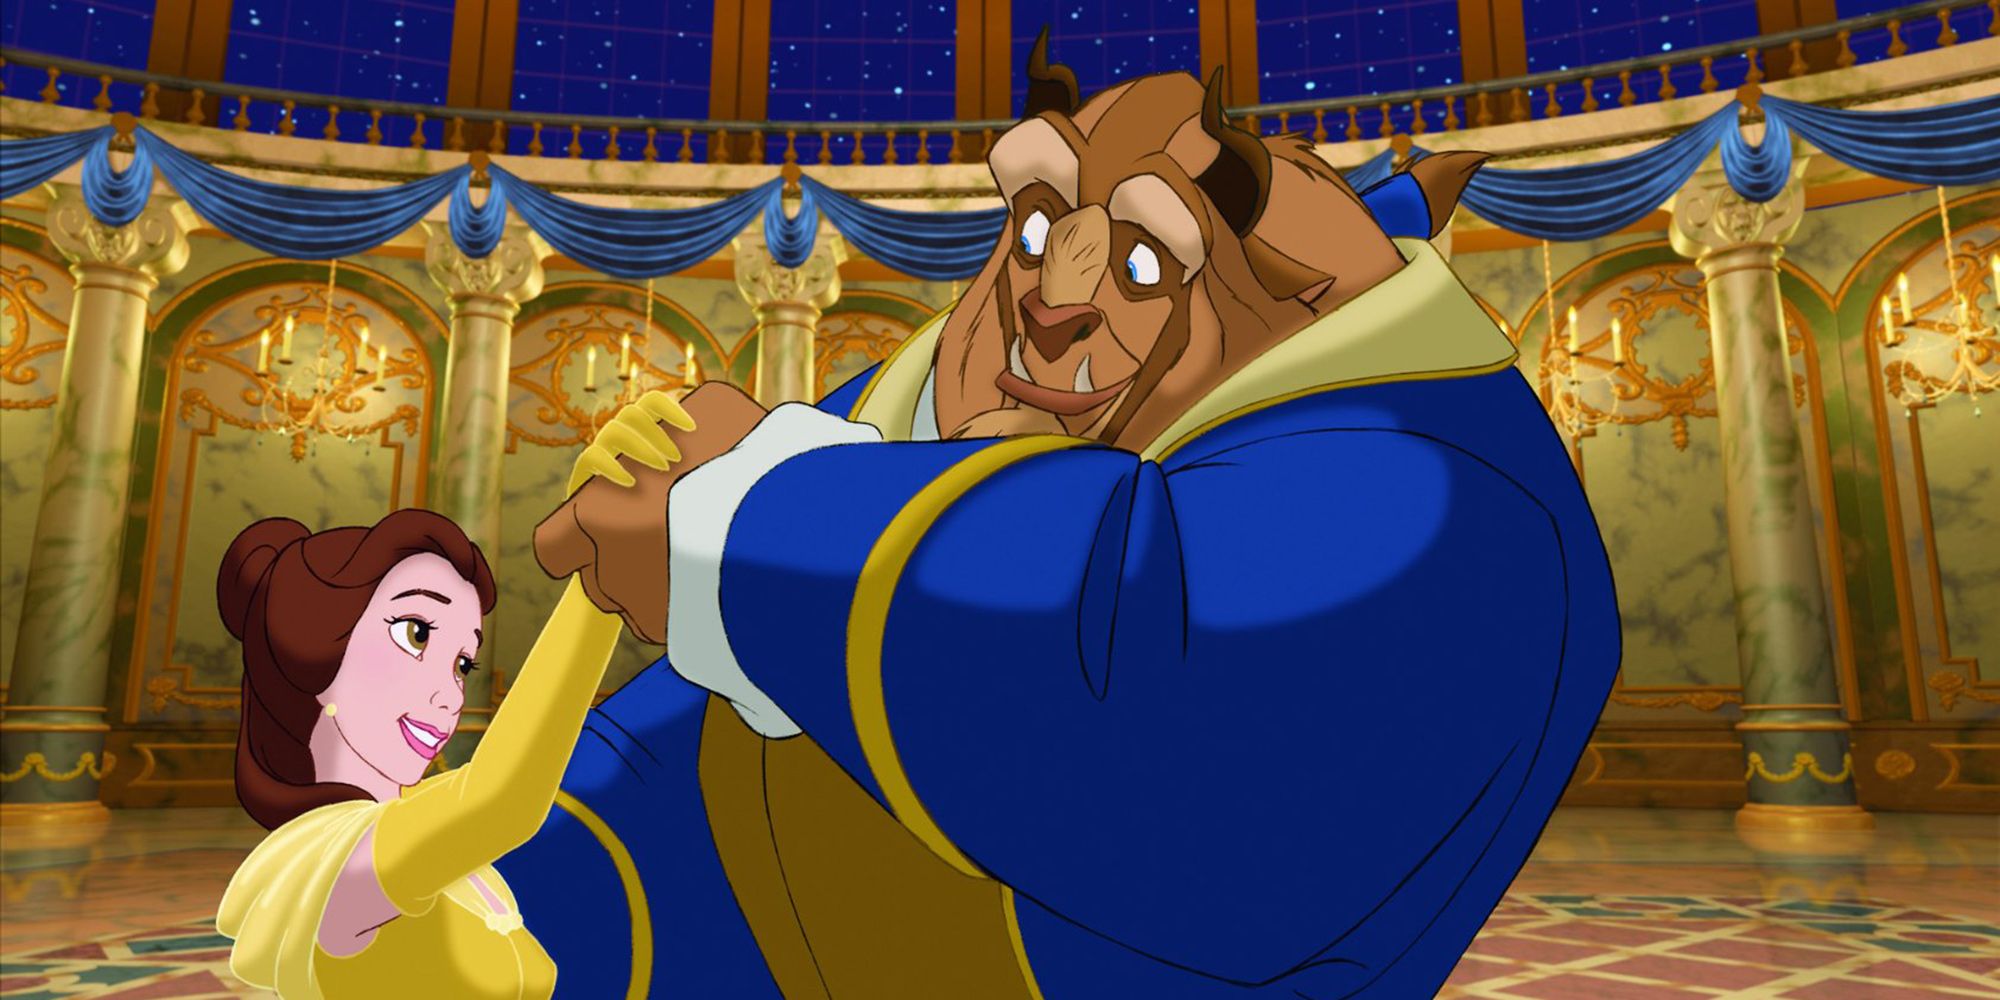 15 Reasons The Original Beauty And The Beast Is Better Than The Remake